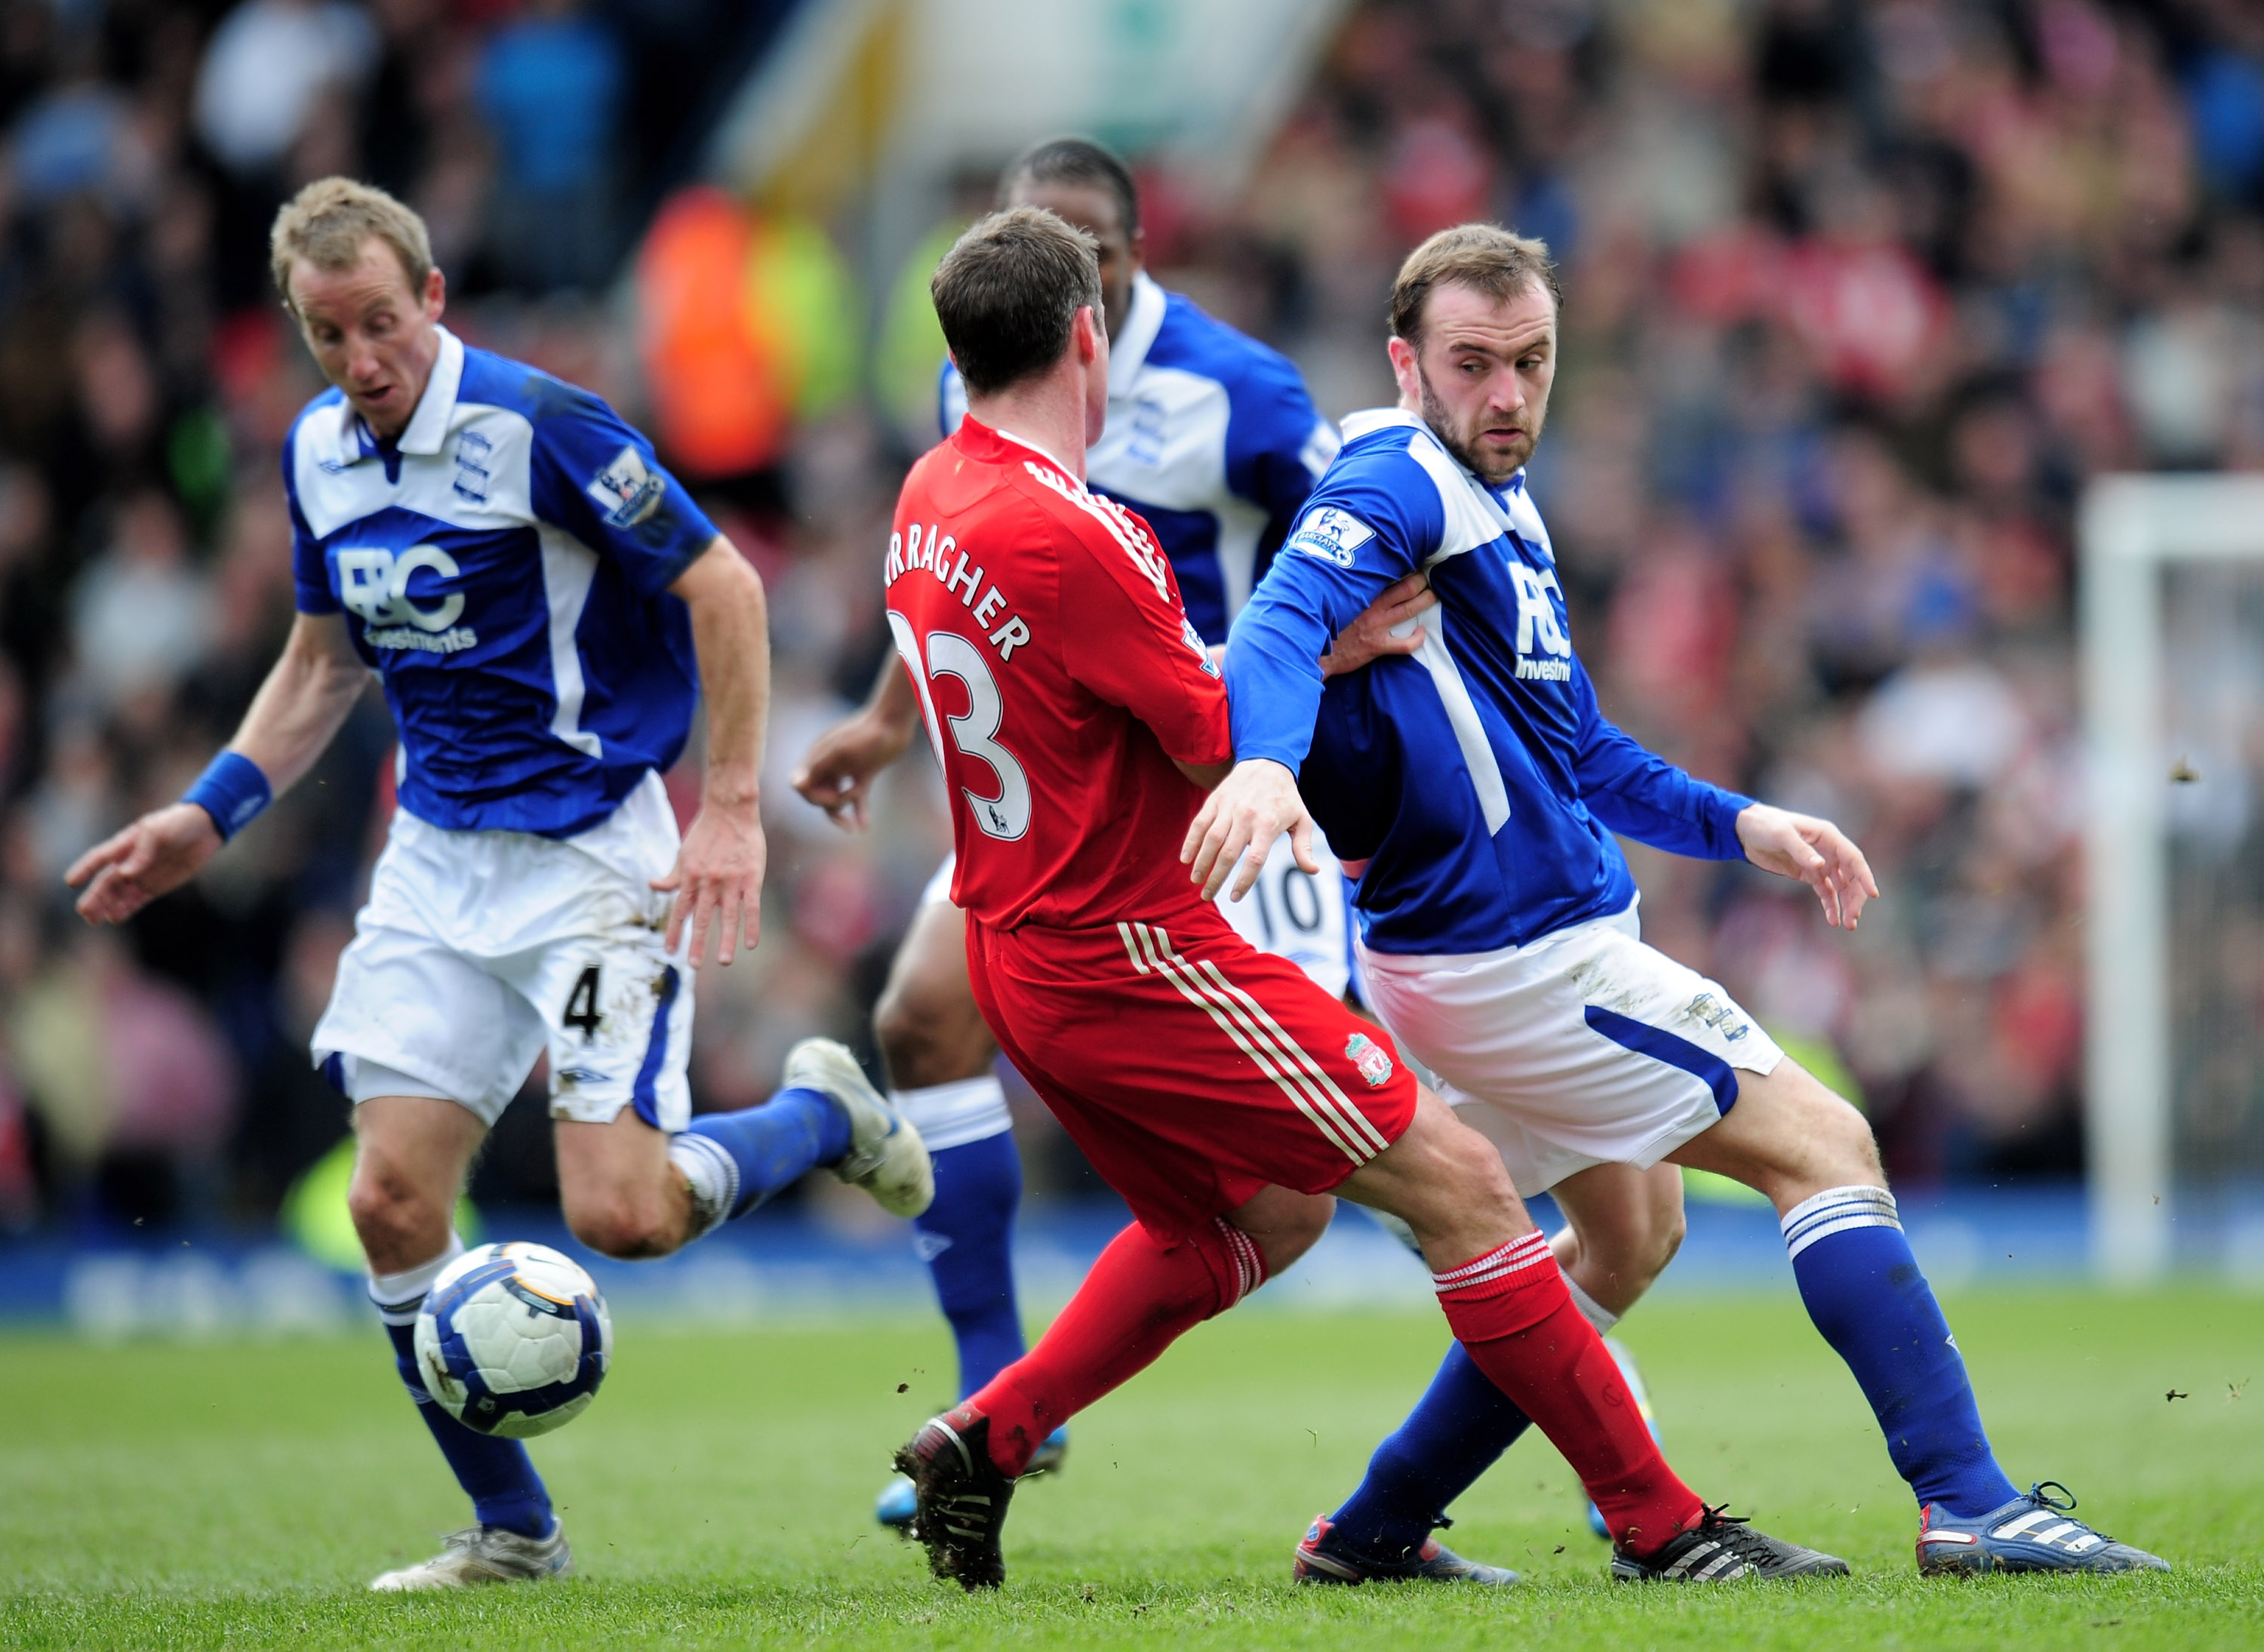 BIRMINGHAM, ENGLAND - APRIL 04:  James McFadden of Birmingham City is challenged by Jamie Carragher of Liverpool during the Barclays Premier League match between Birmingham City and Liverpool at St. Andrews Stadium on April 4, 2010 in Birmingham, England.